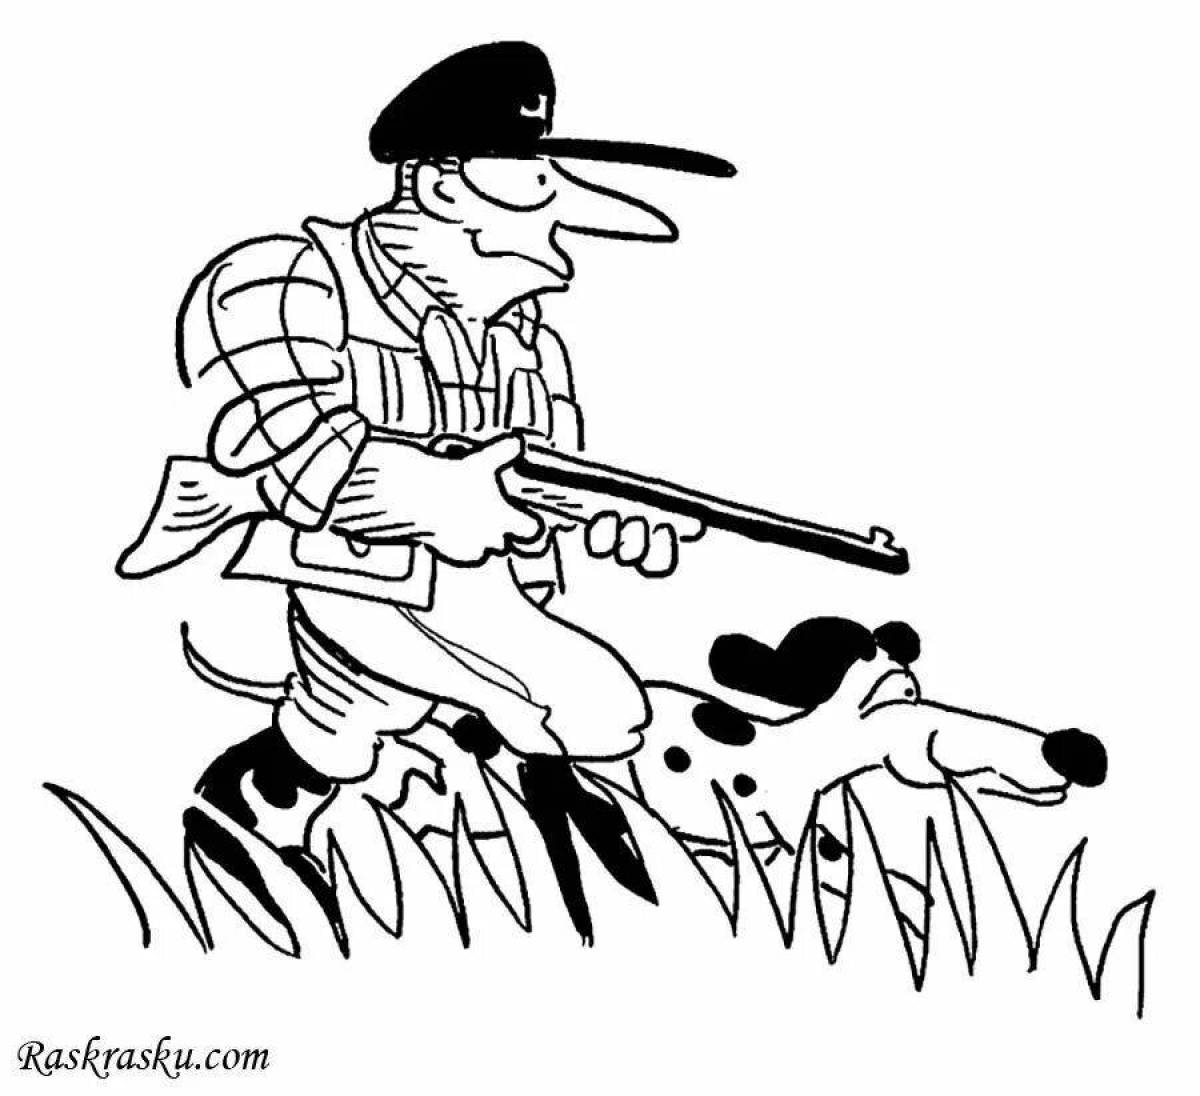 Stealth hunter coloring page